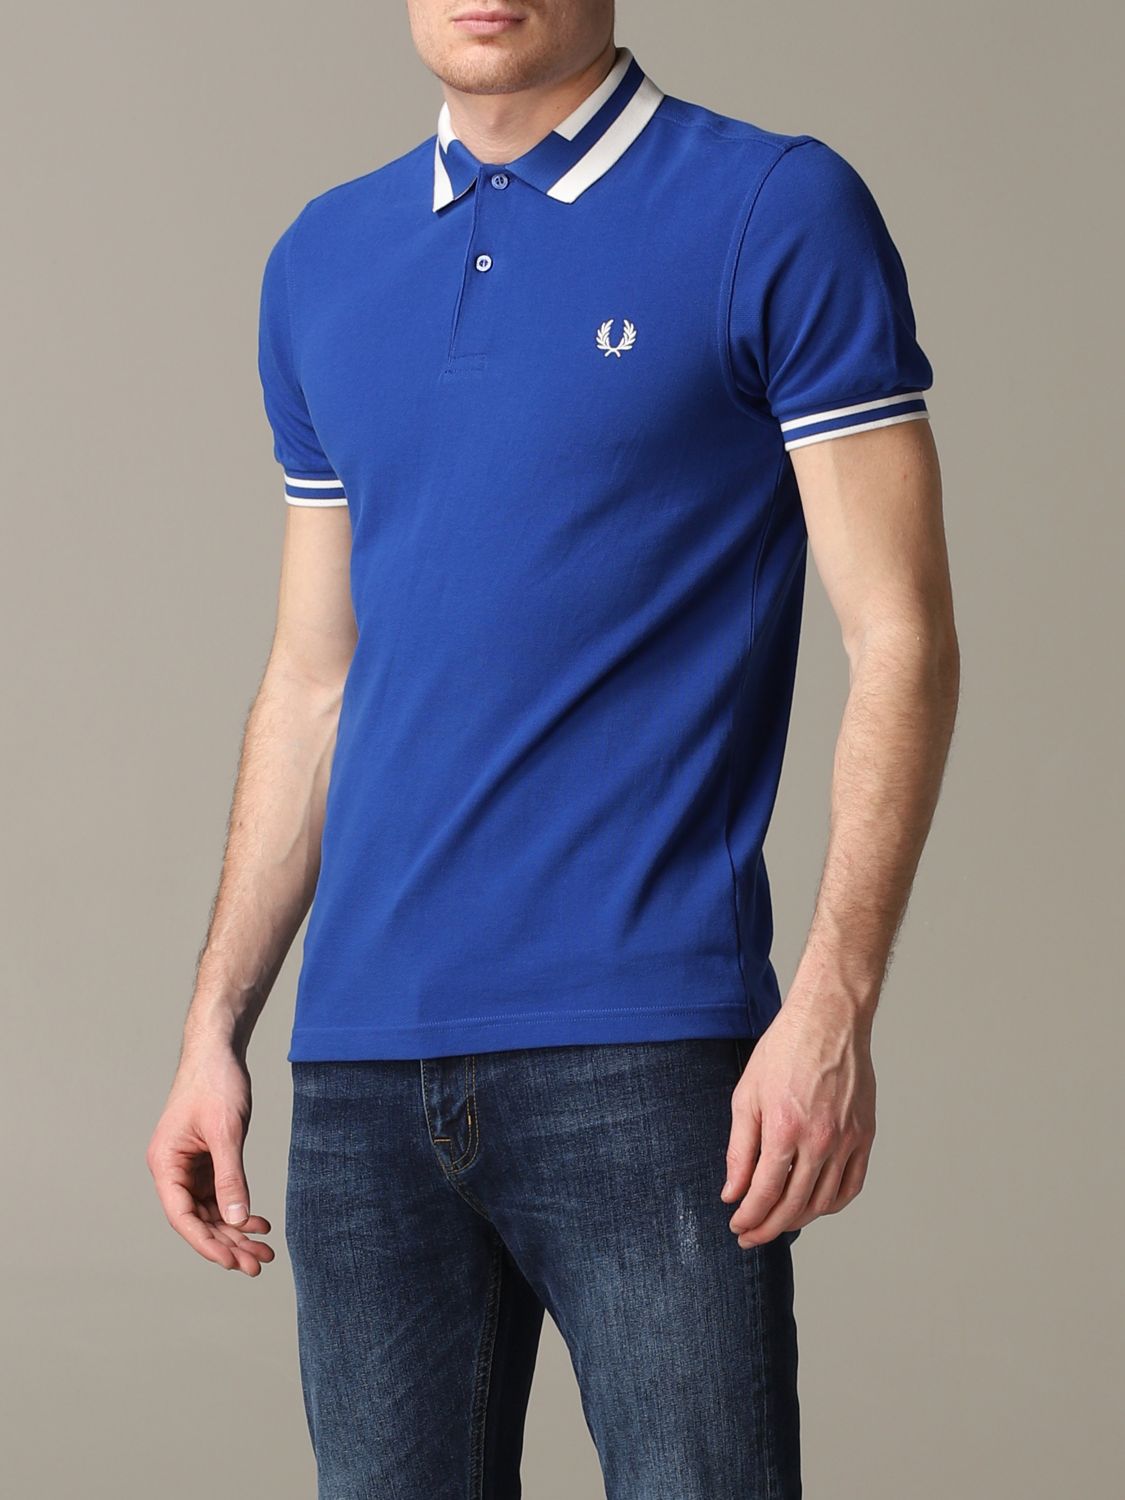 Fred Perry Outlet: T-shirt men | T-Shirt Fred Perry Men Royal Blue | T ...